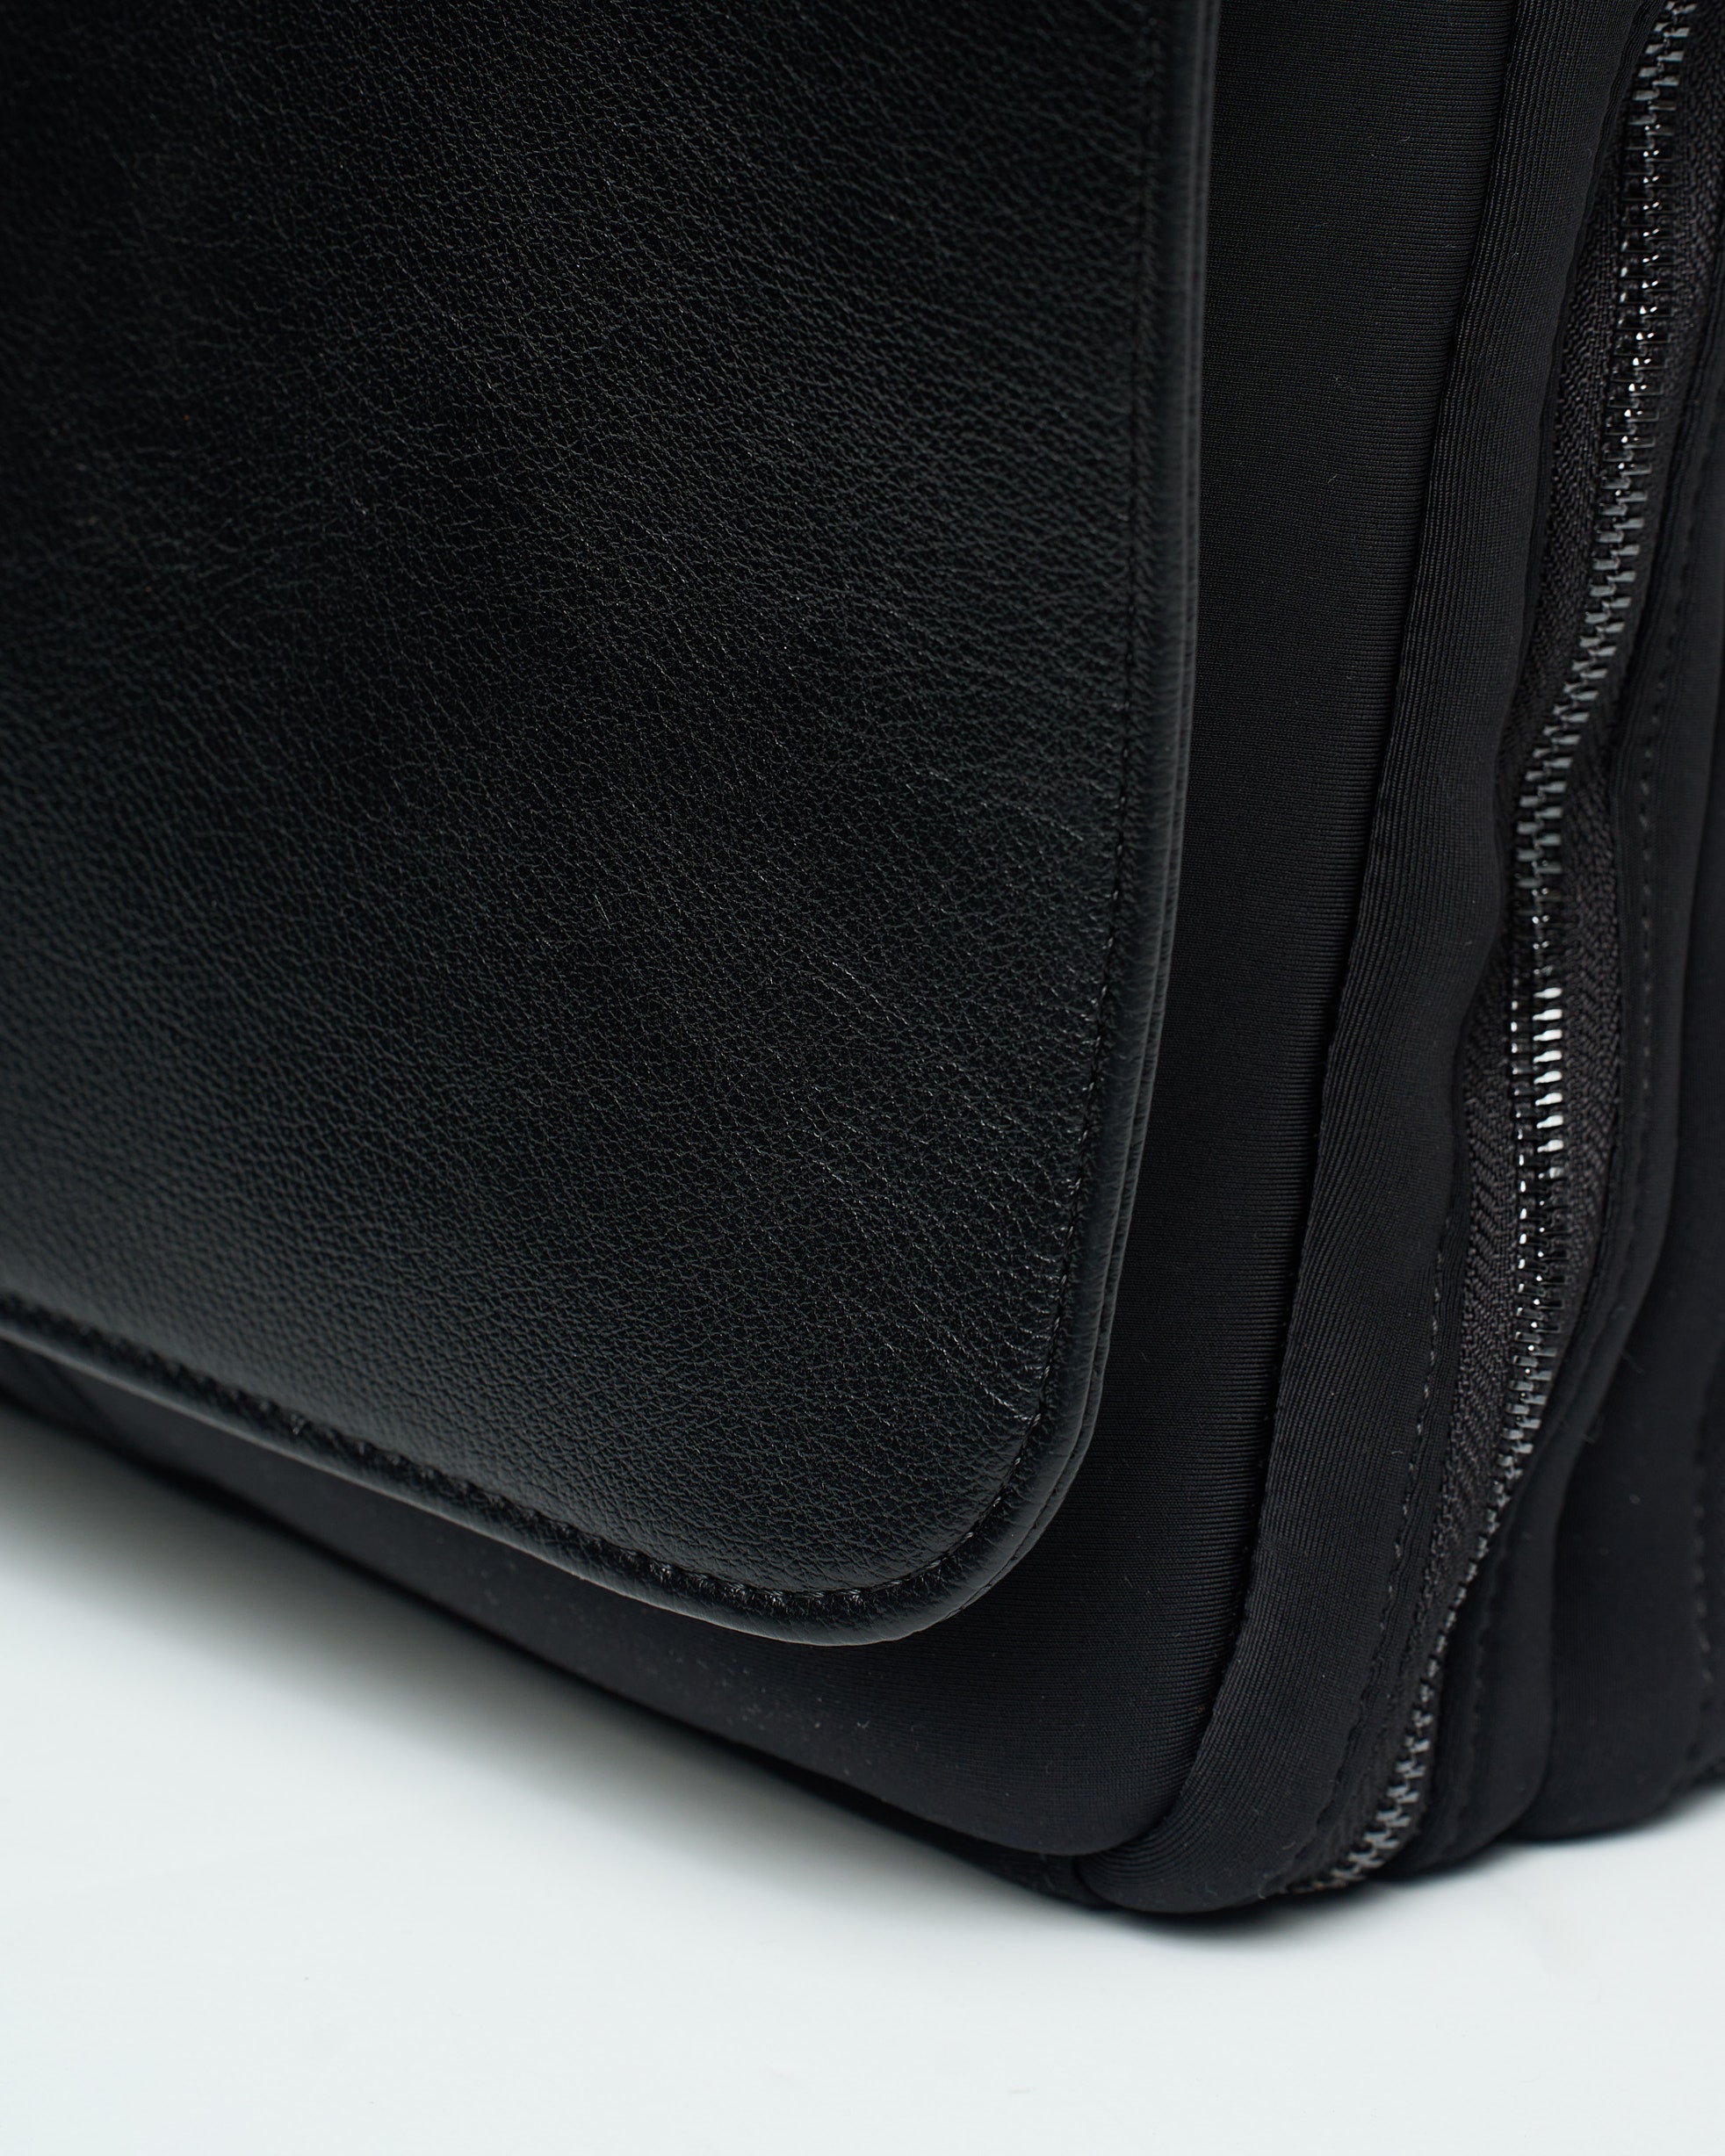 The Capsoul Pack – A lightweight work bag for creative professionals ...